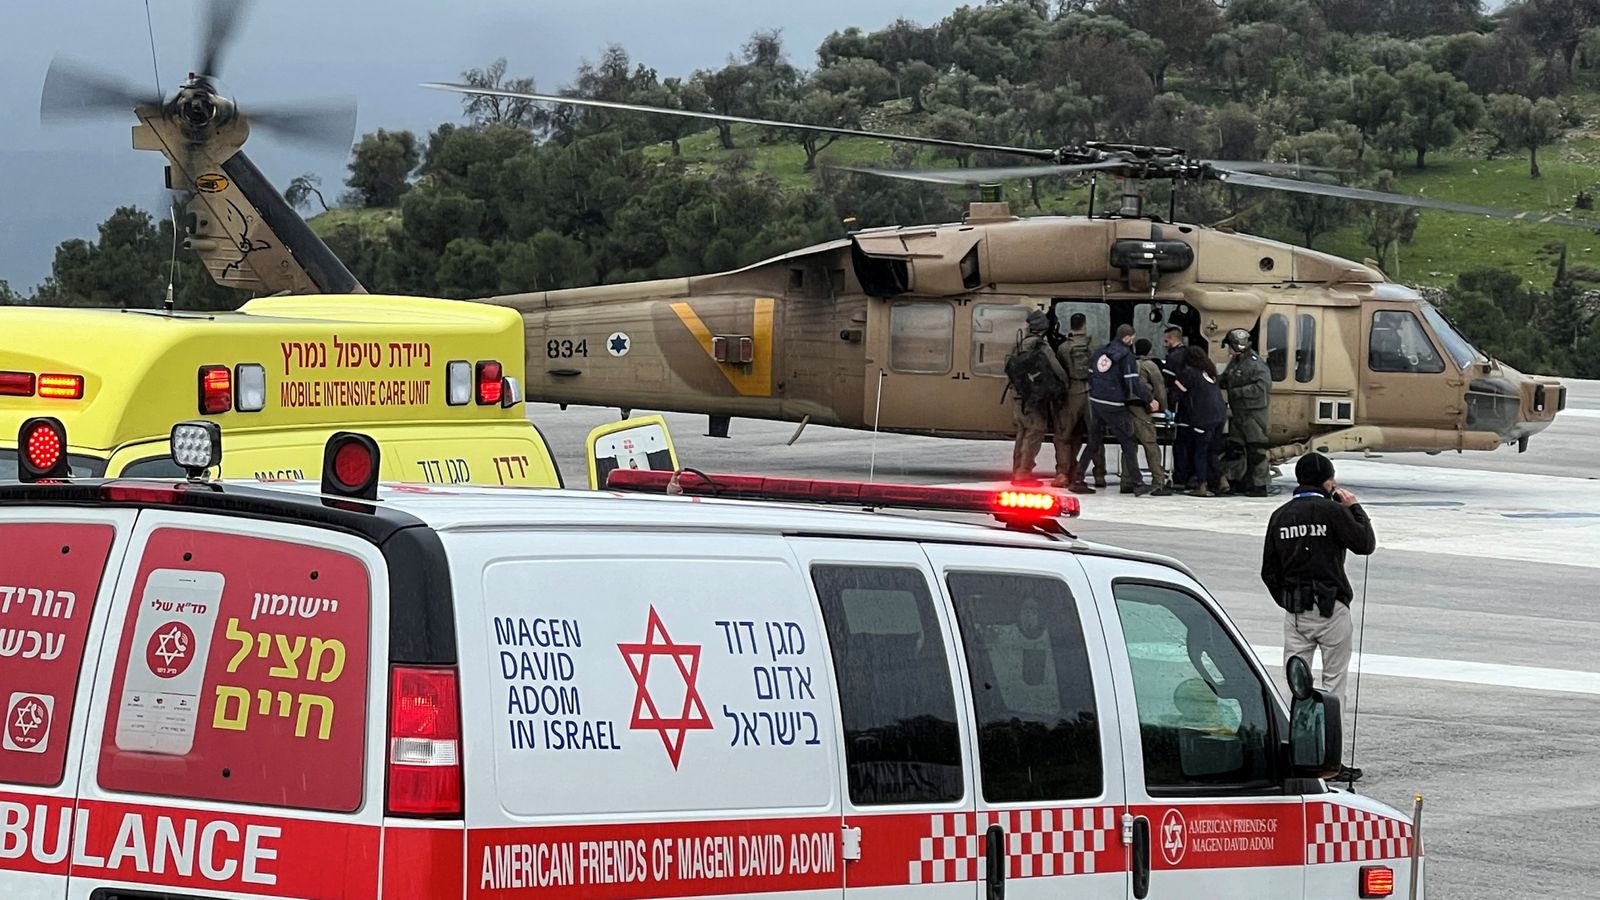 Children among 11 people killed in Israeli strikes on Lebanon, say security sources